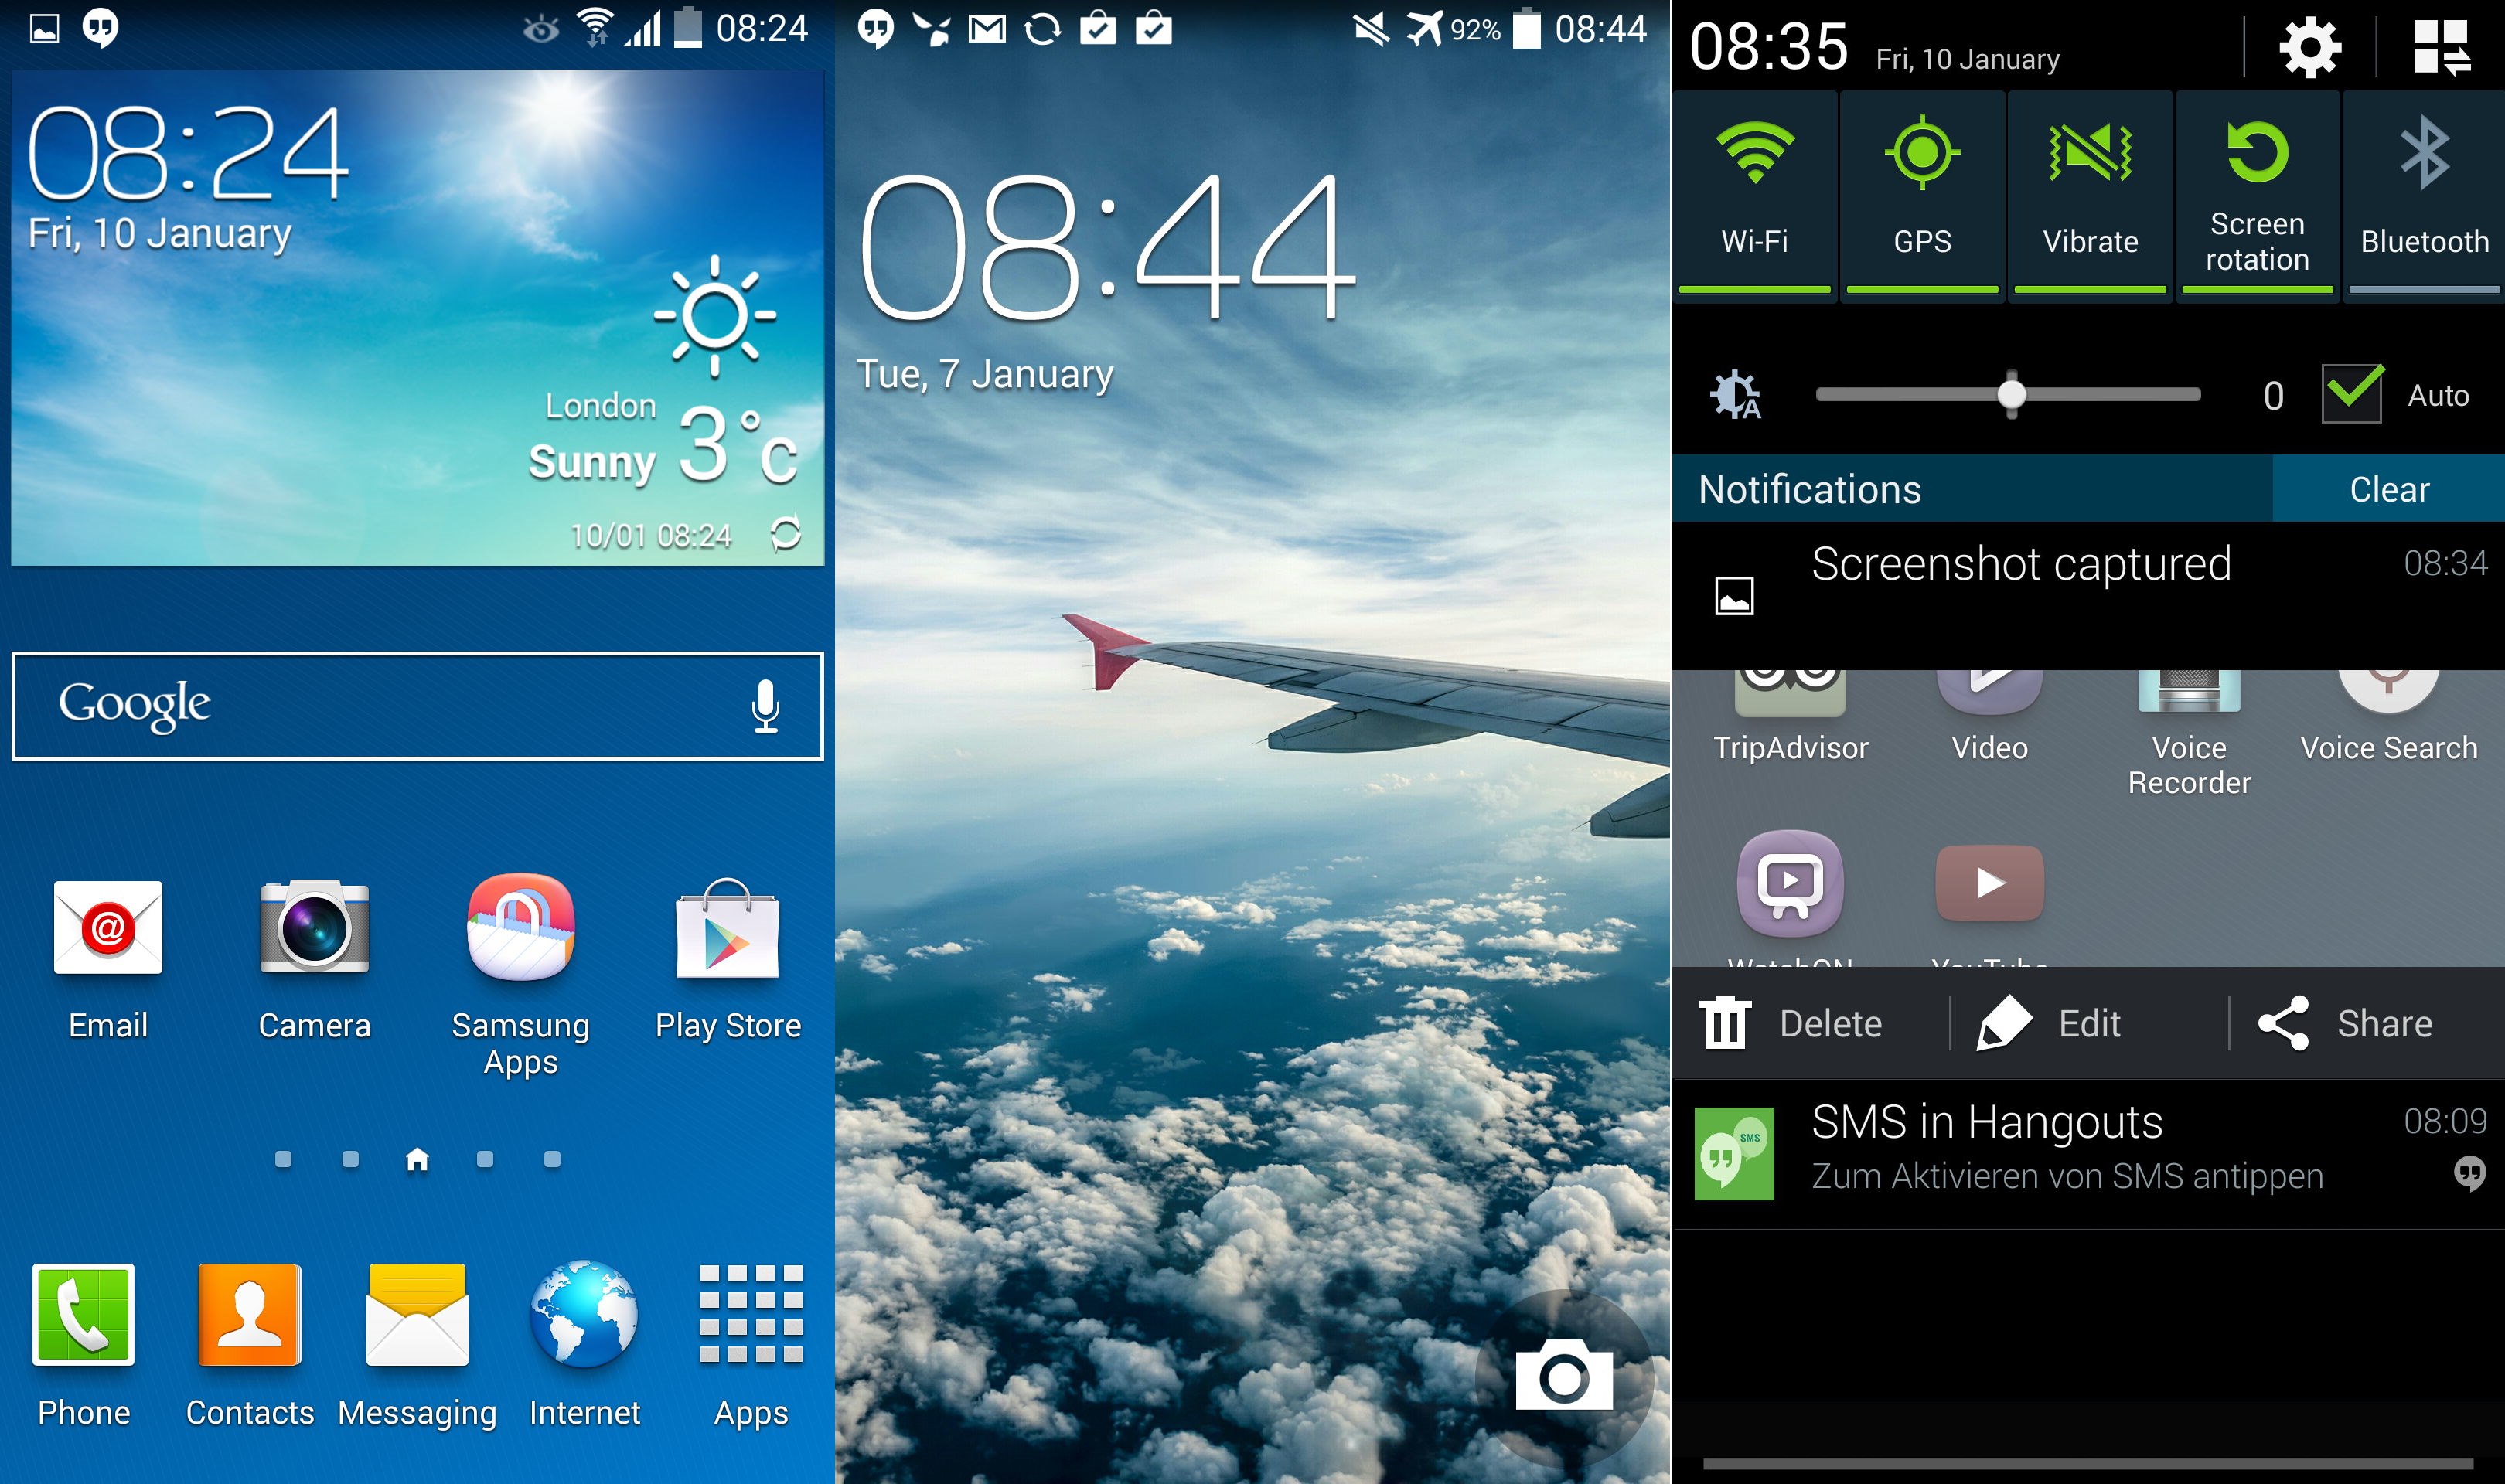 samsung galaxy s4 android 4.4 kitkat firmware feature